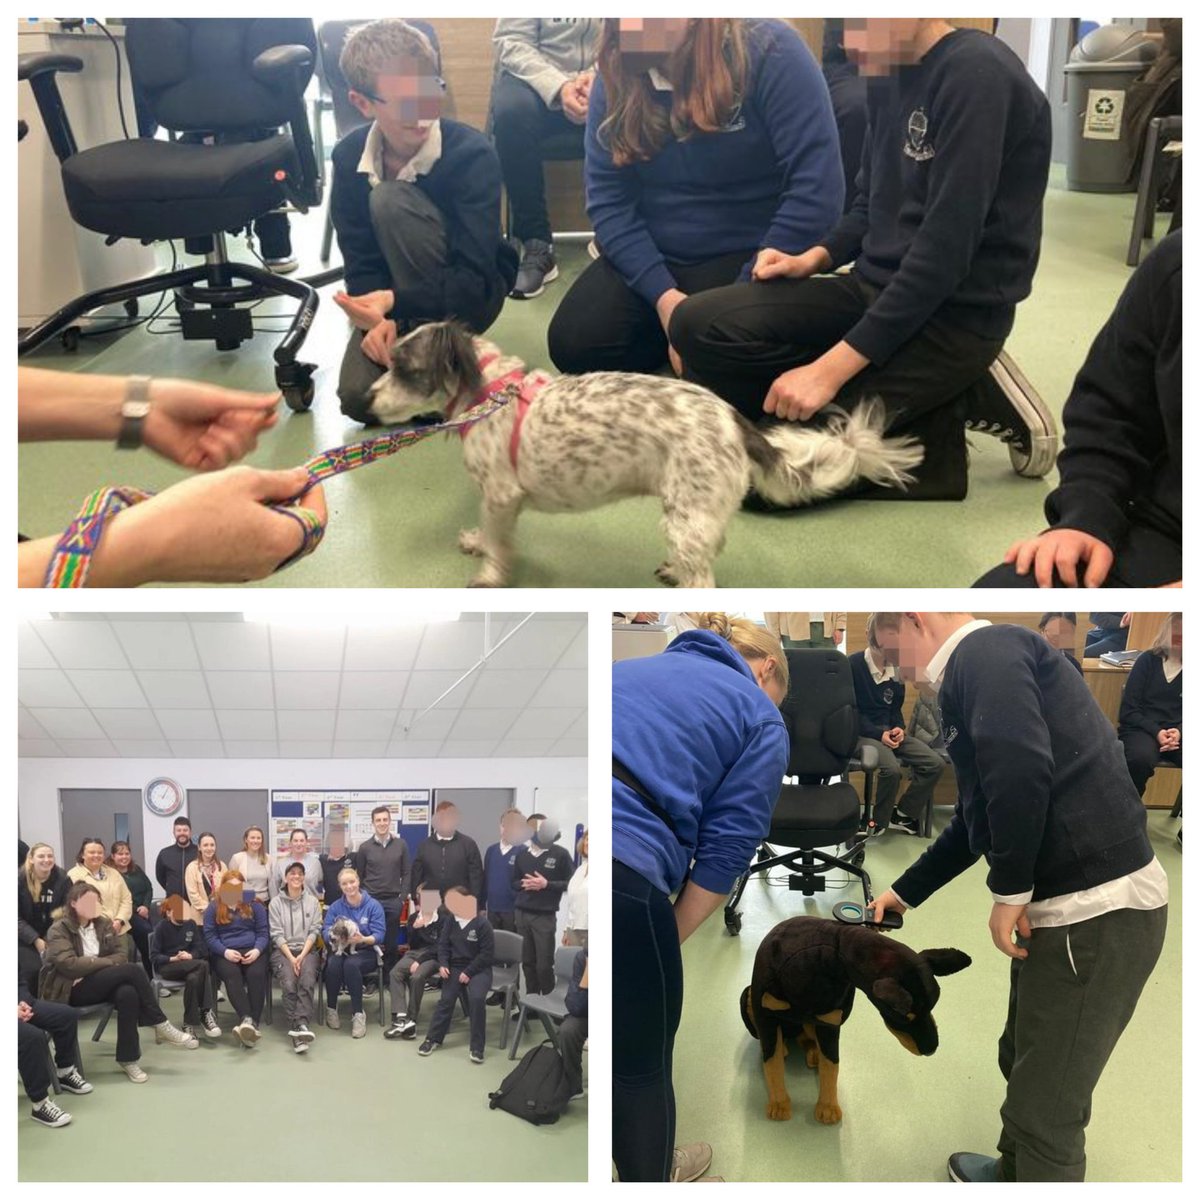 MADRA visited St Paul's Secondary #School, Oughterard #Galway 🌟

We spoke about responsible #dog ownership, dog welfare, safe dog handling and more as part of our Talking Dogs workshop. 🐾

The class held a bake sale fundraiser  too 👏💞

🙏Thank you St Paul's🙏
#AdoptDontShop